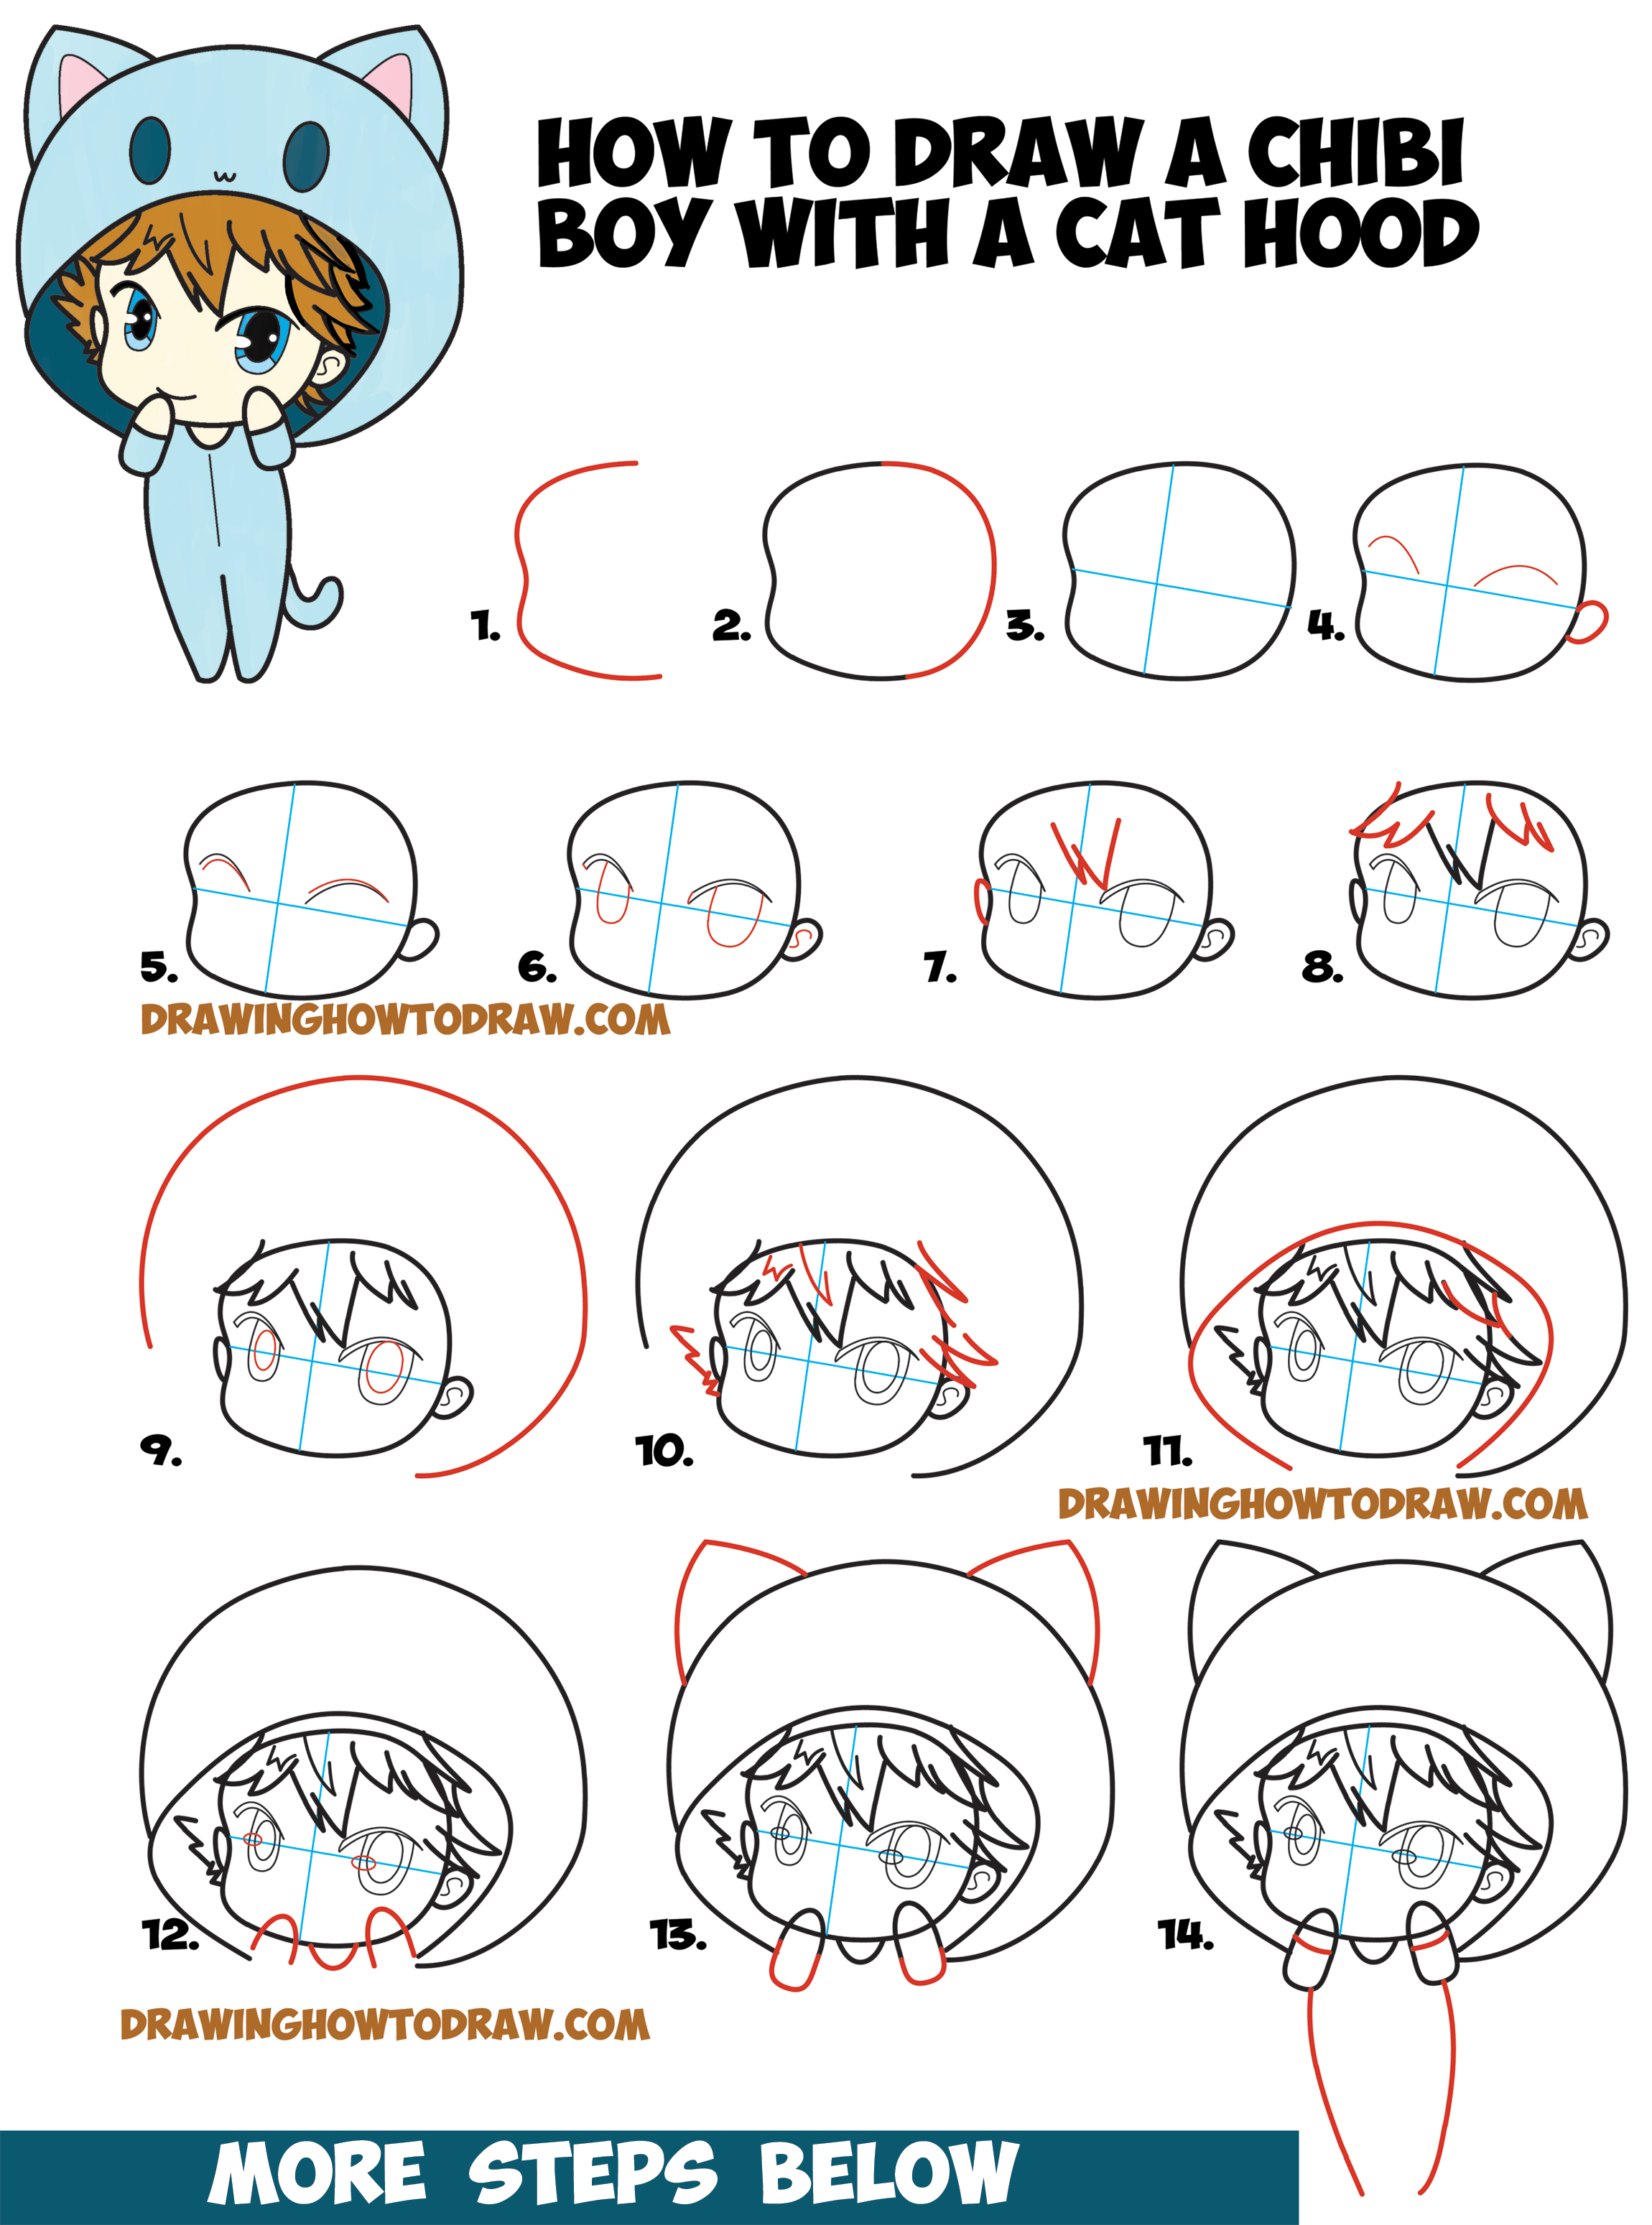 How to Draw a Chibi Boy with Hood On - Drawing Cute Chibi Boys - Easy Step by Step Drawing ...